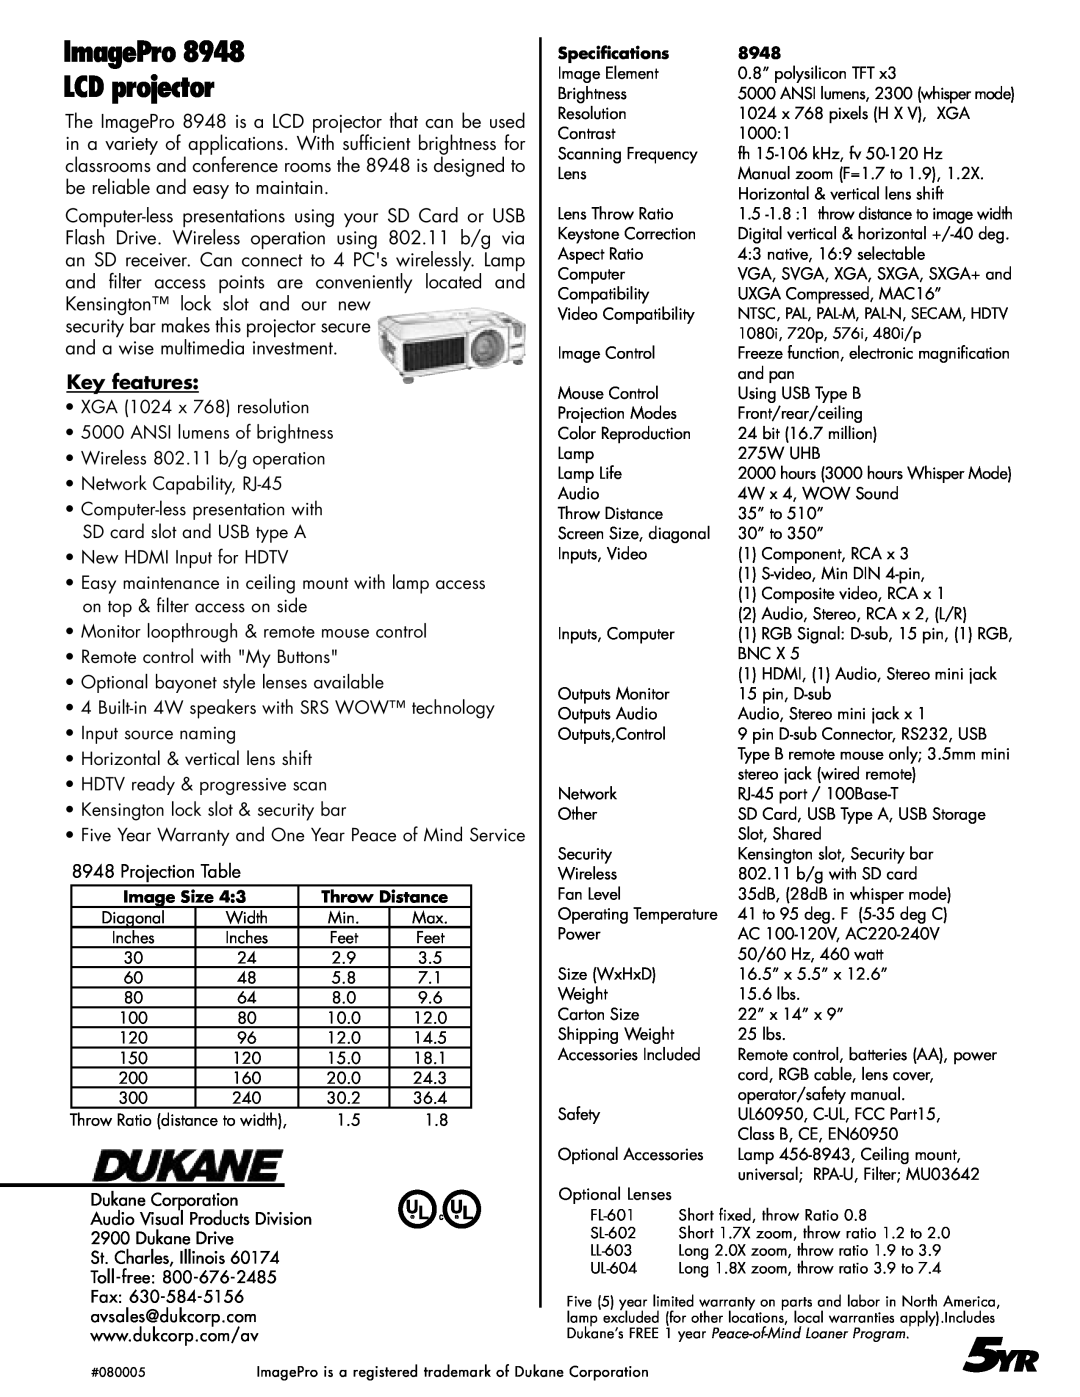 Dukane 8948 manual ImagePro, LCD projector, Key features 